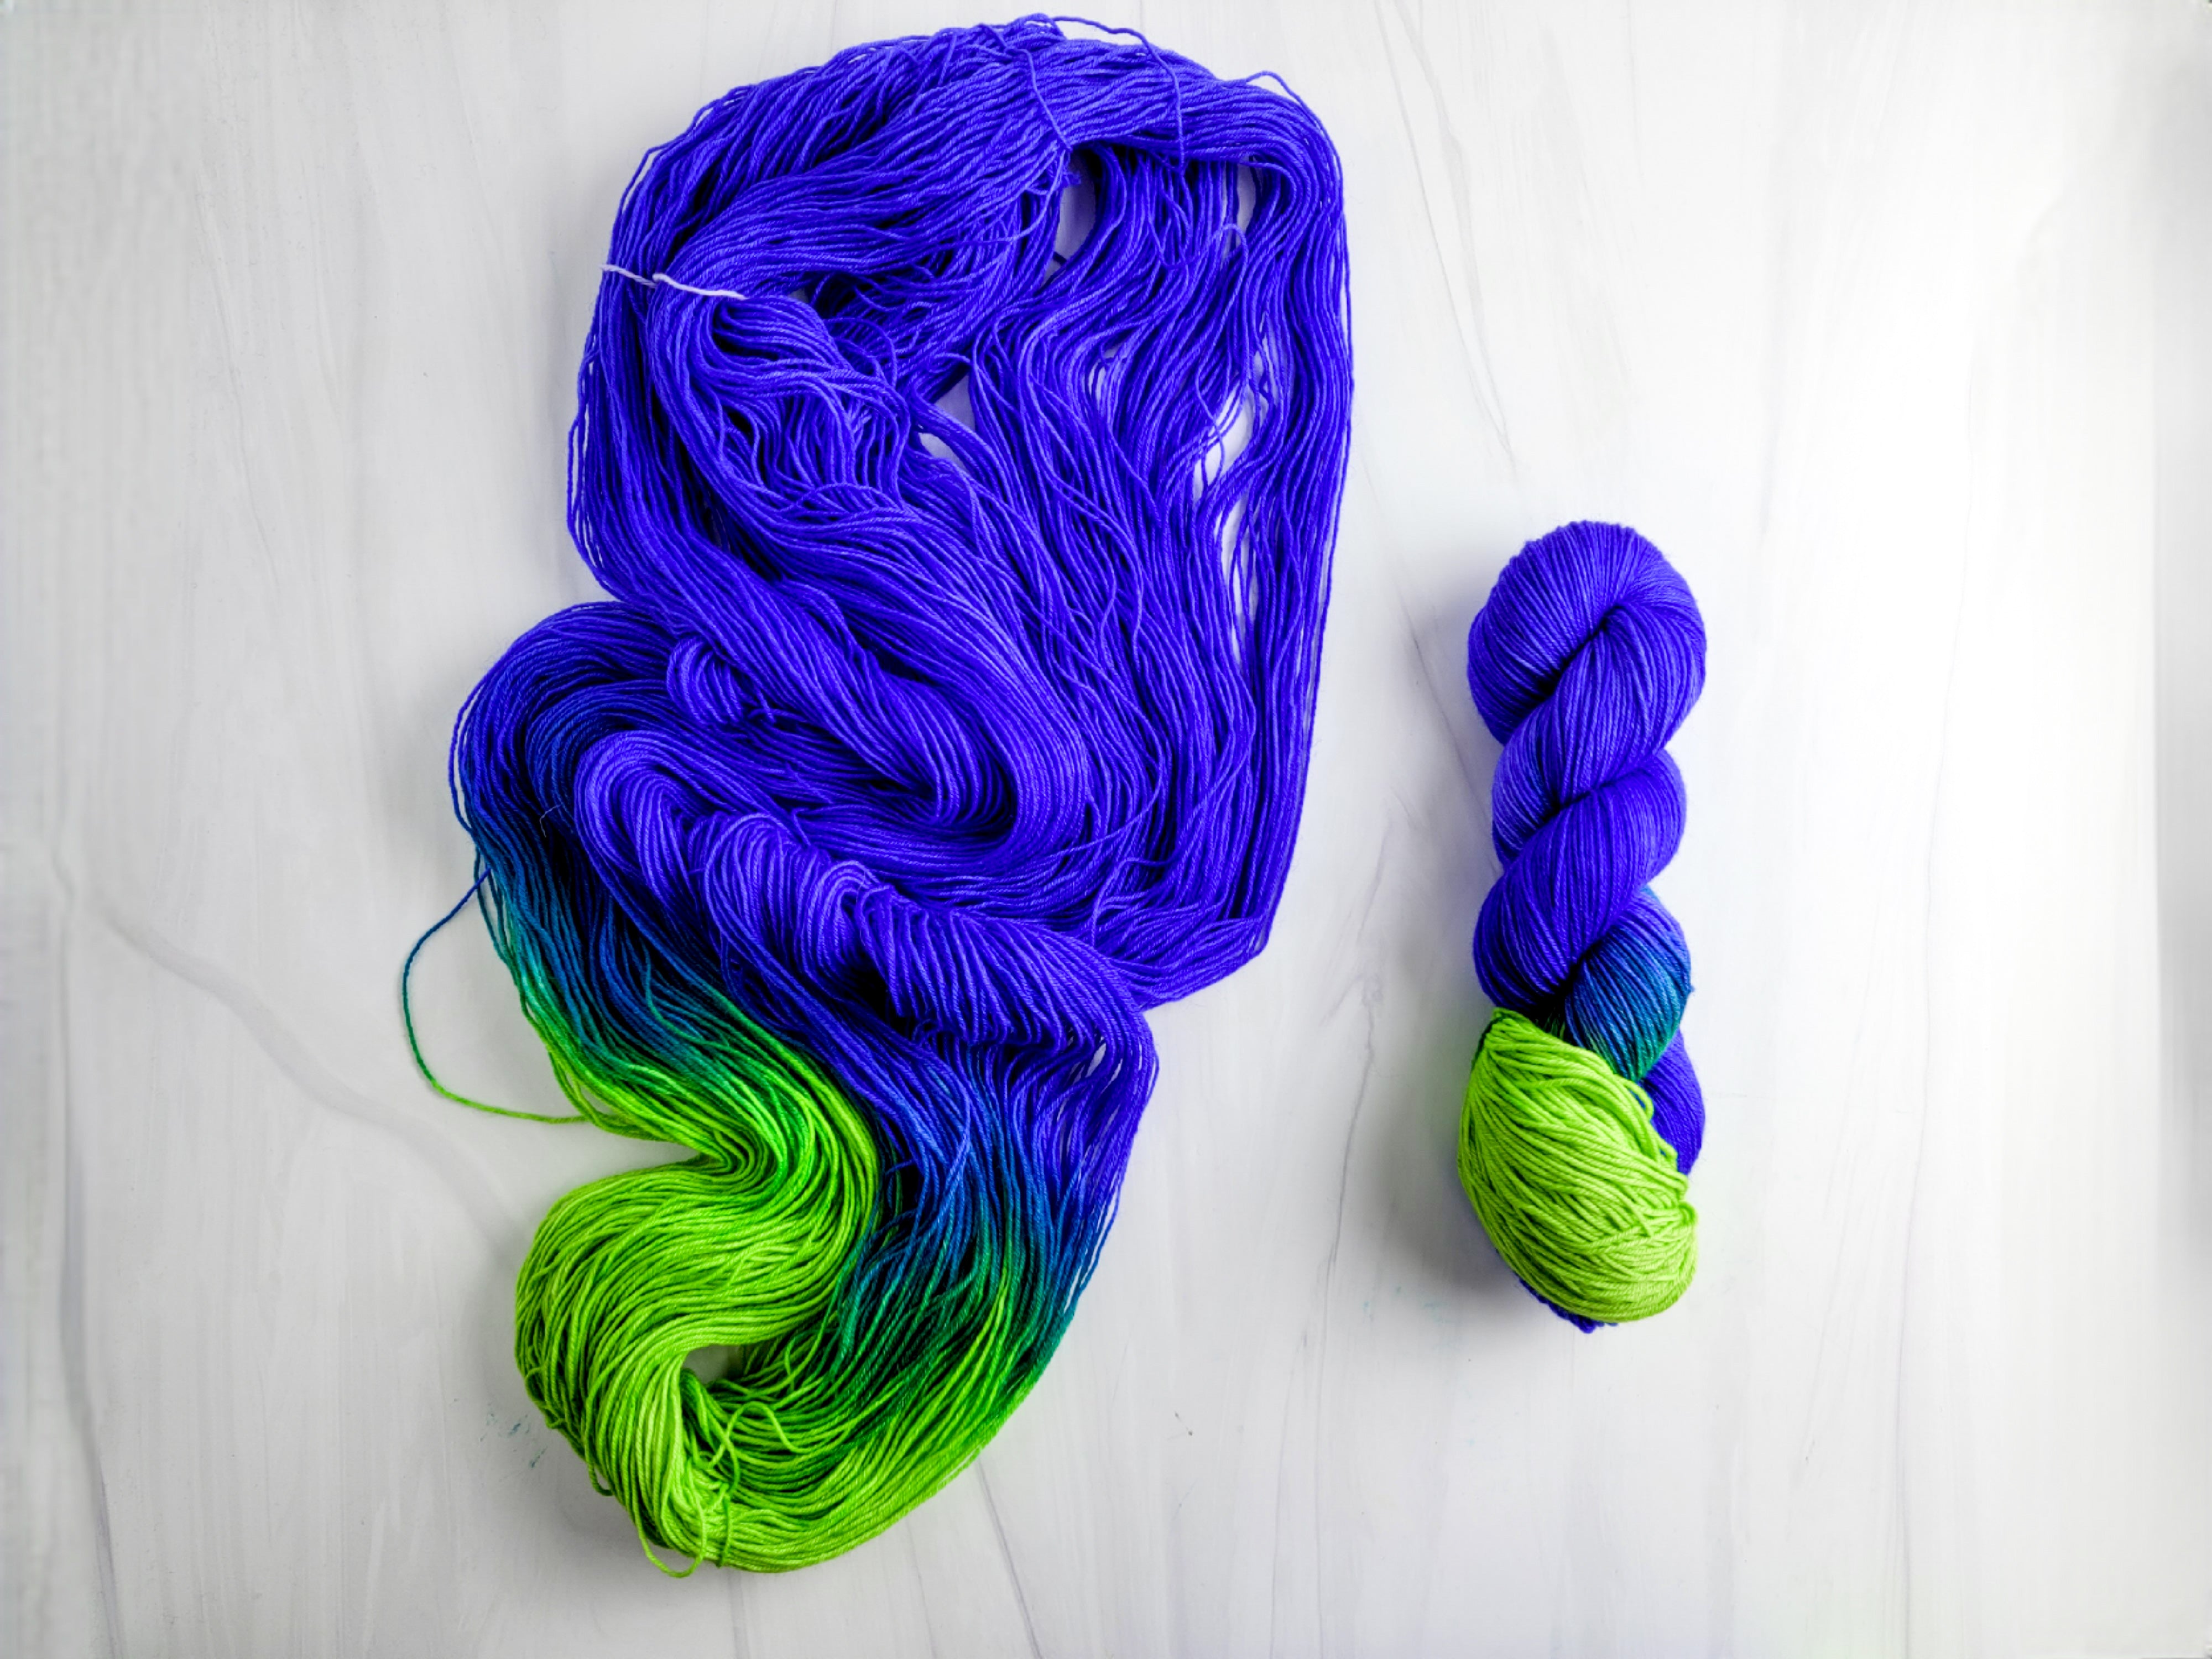 Medusa - Hand dyed assigned pooling yarn - blue violet and green